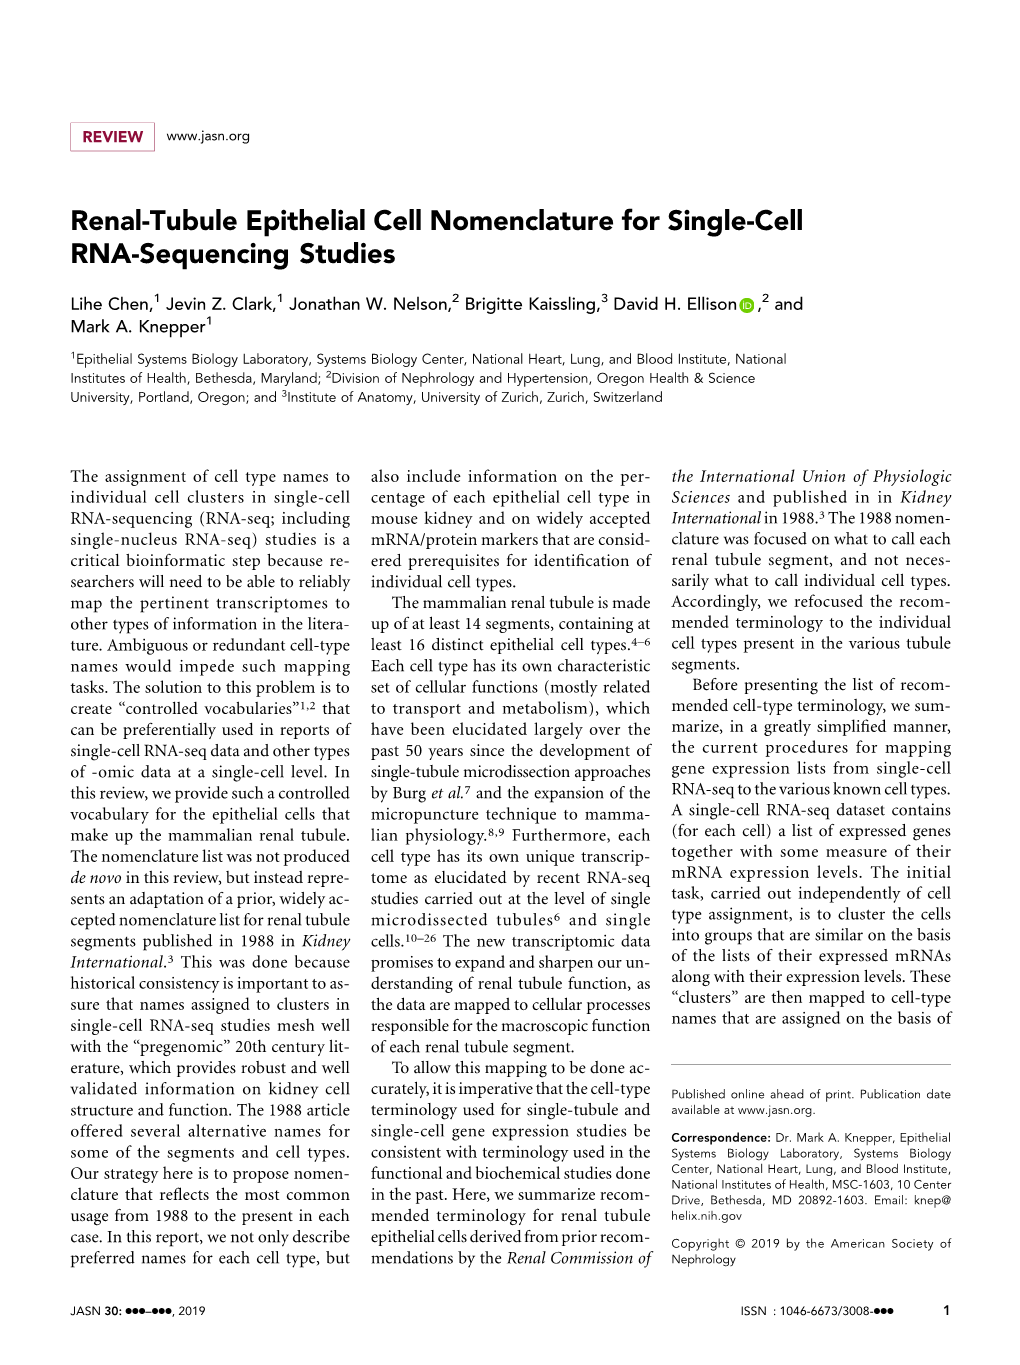 Renal-Tubule Epithelial Cell Nomenclature for Single-Cell RNA-Sequencing Studies